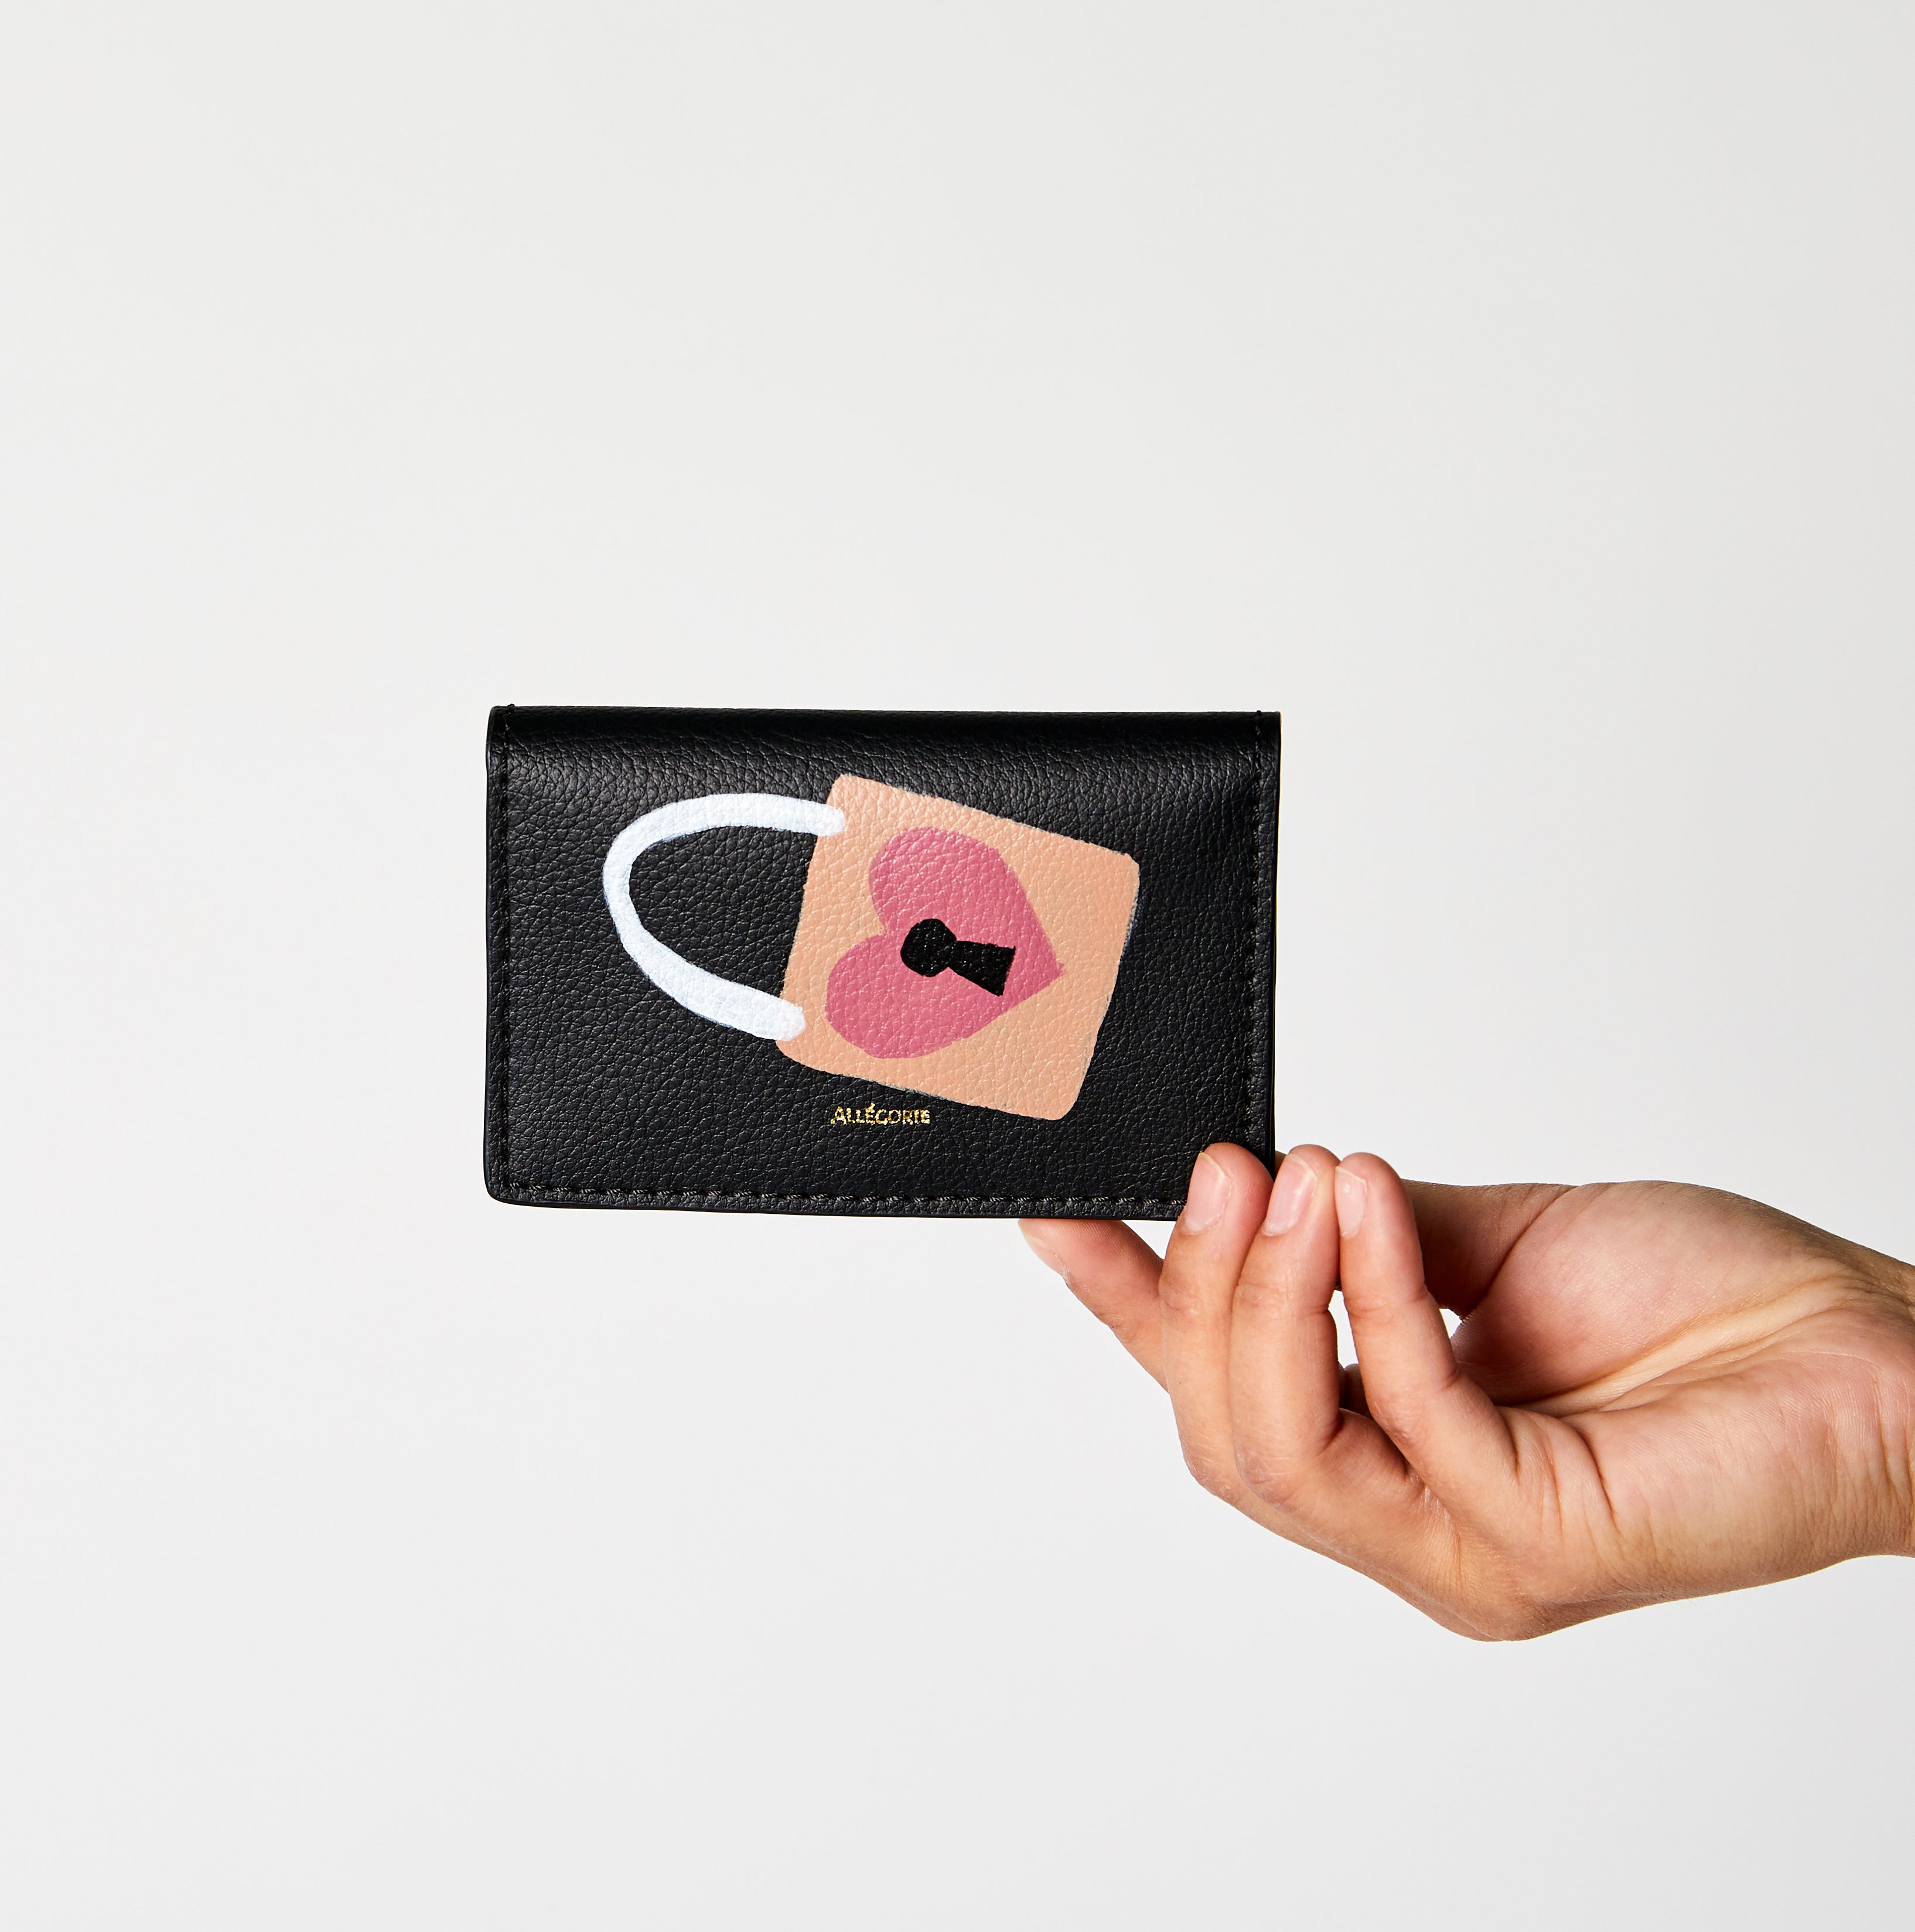 hand painted cardholder by LGBTQA+ artist on vegan sustainable materials